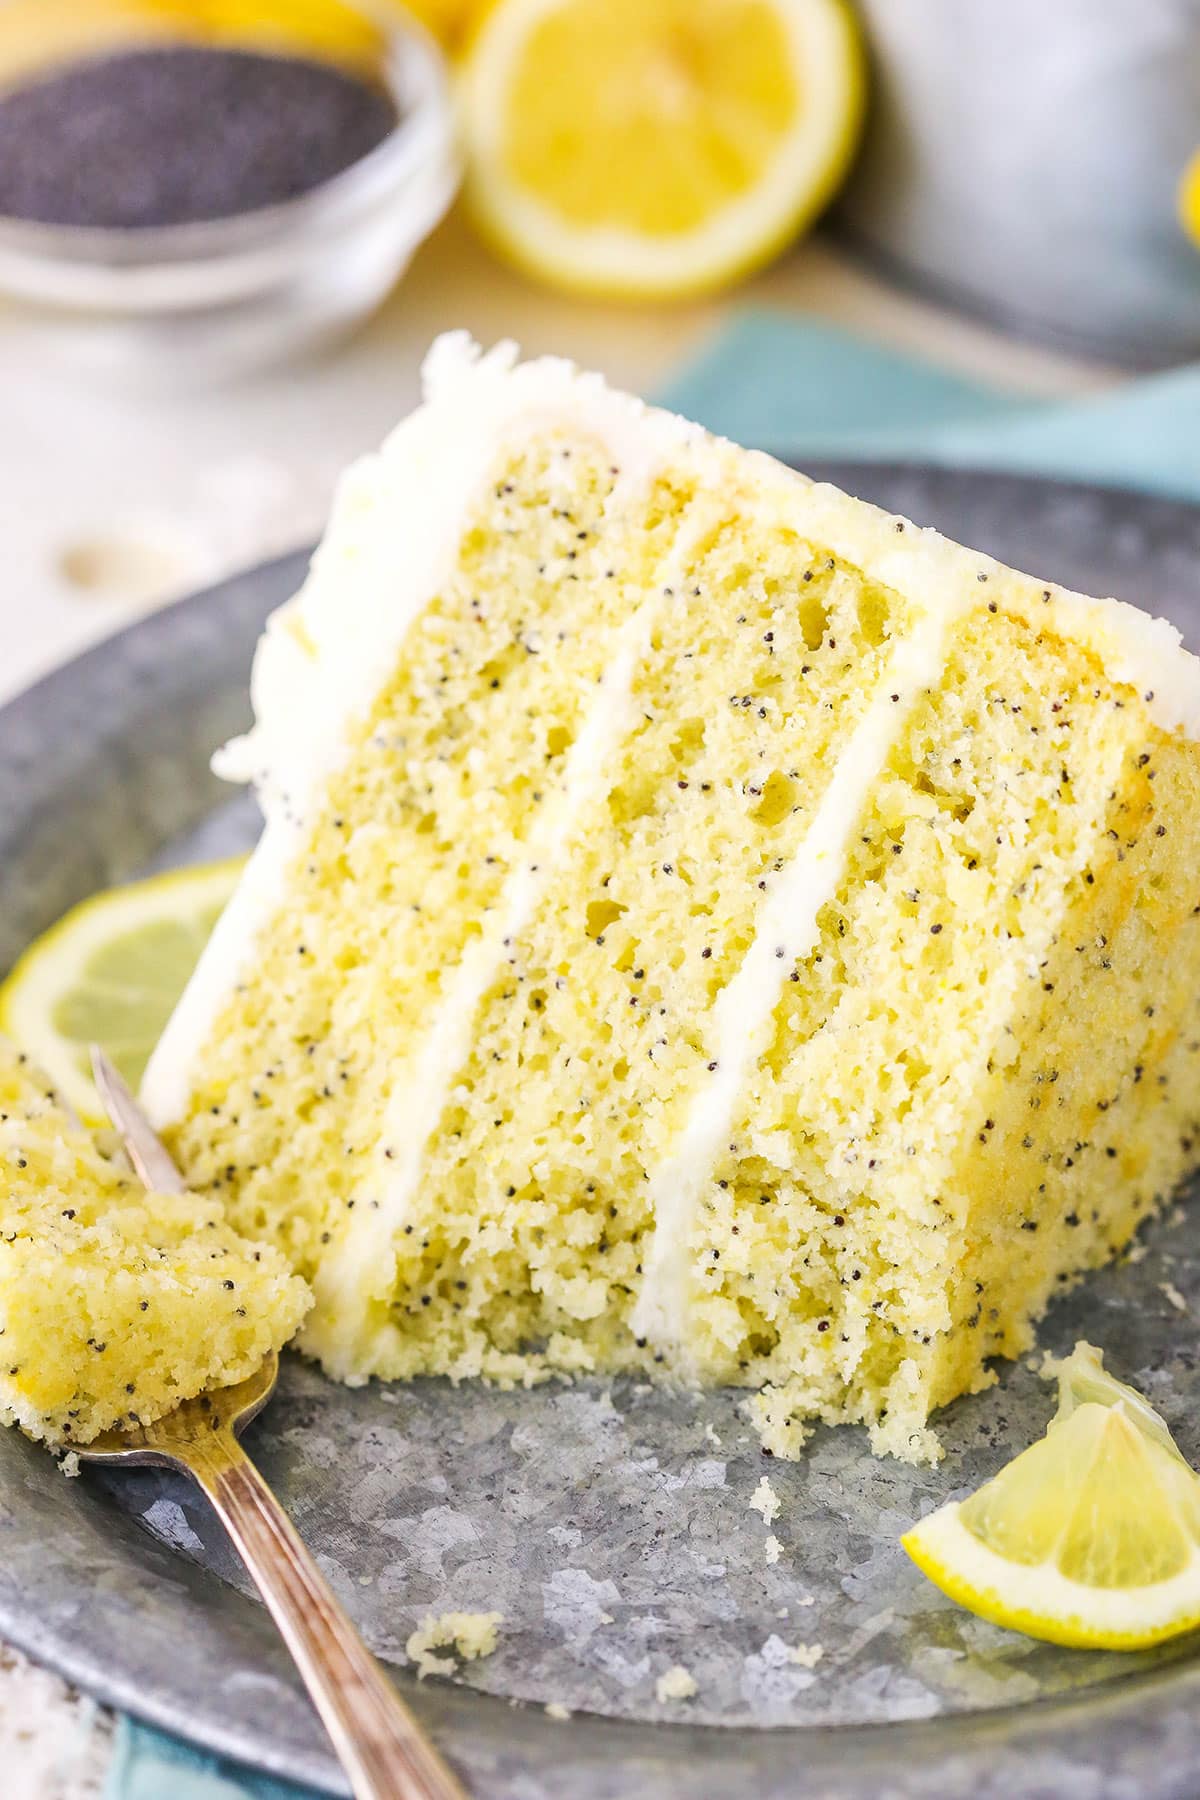 A slice of Lemon Poppyseed Cake with a bite removed next to a fork on a gray plate